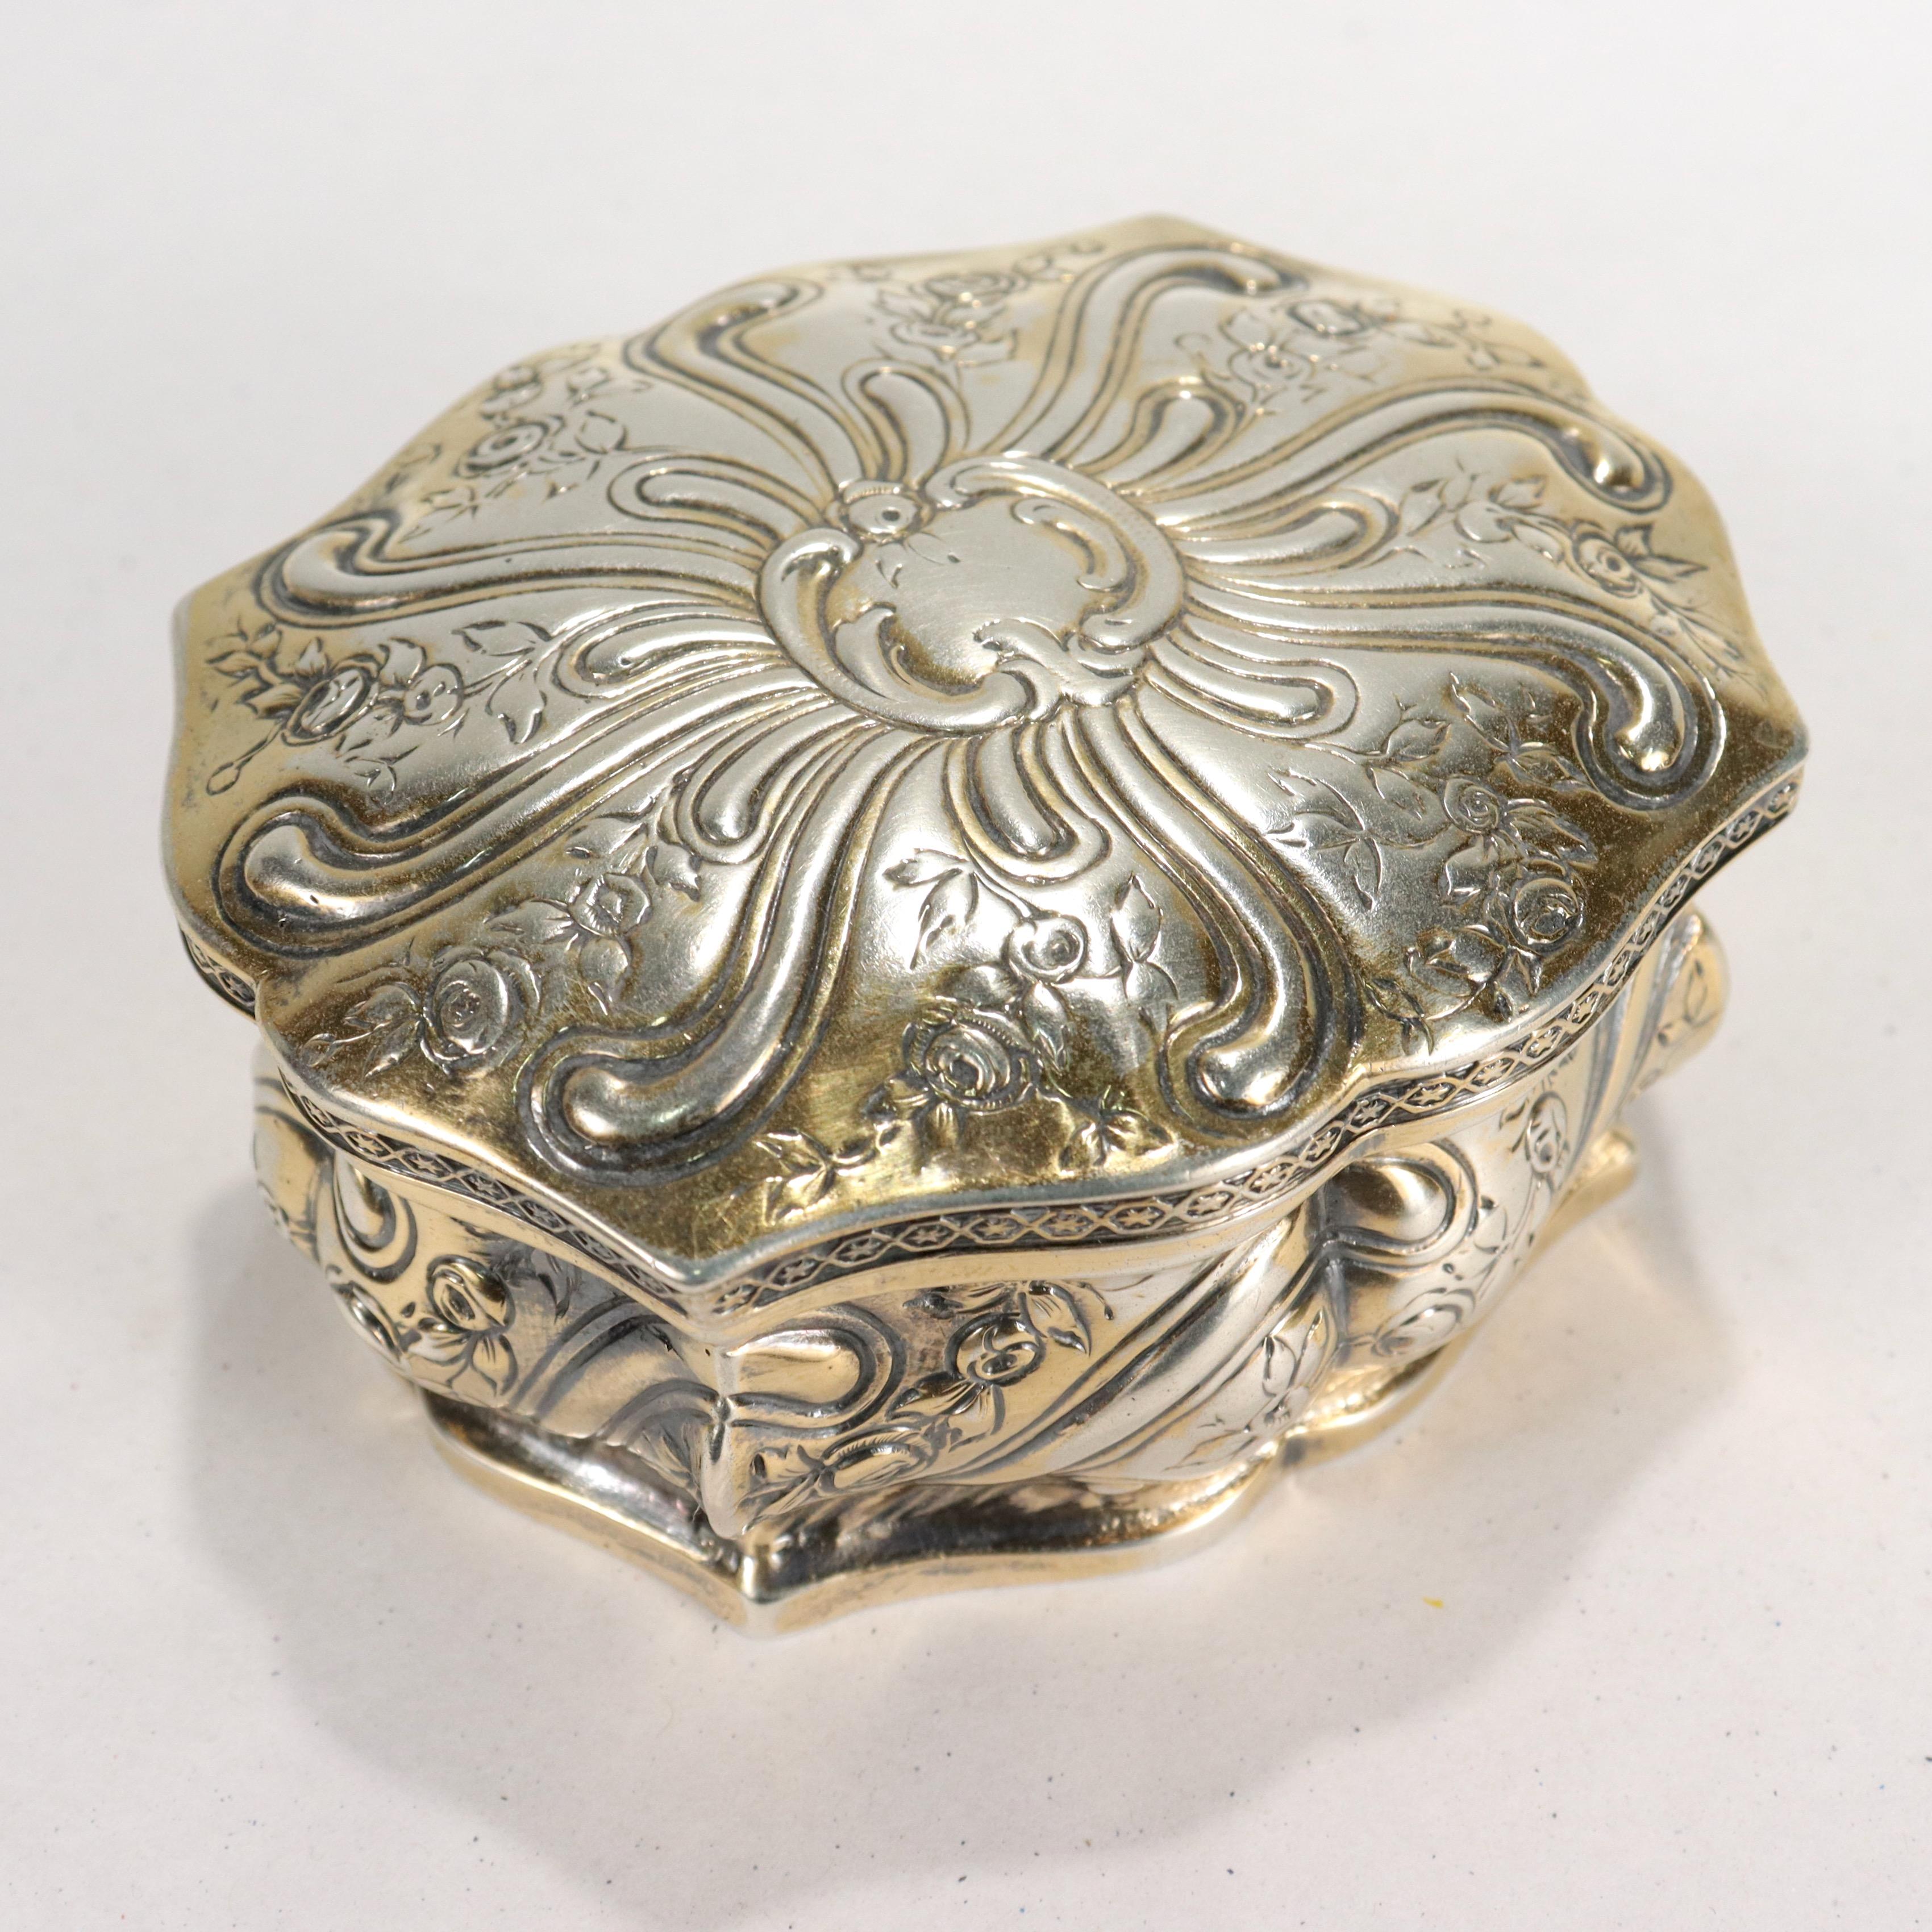 A fine antique German gilt solid silver hinged dresser or snuff box.

With a shaped body & conforming lid and overall repousse decoration.

Marked to the base with pseudo-Hanau German hallmarks for Gebrüder Dingeldein.

Simply a wonderful ornate